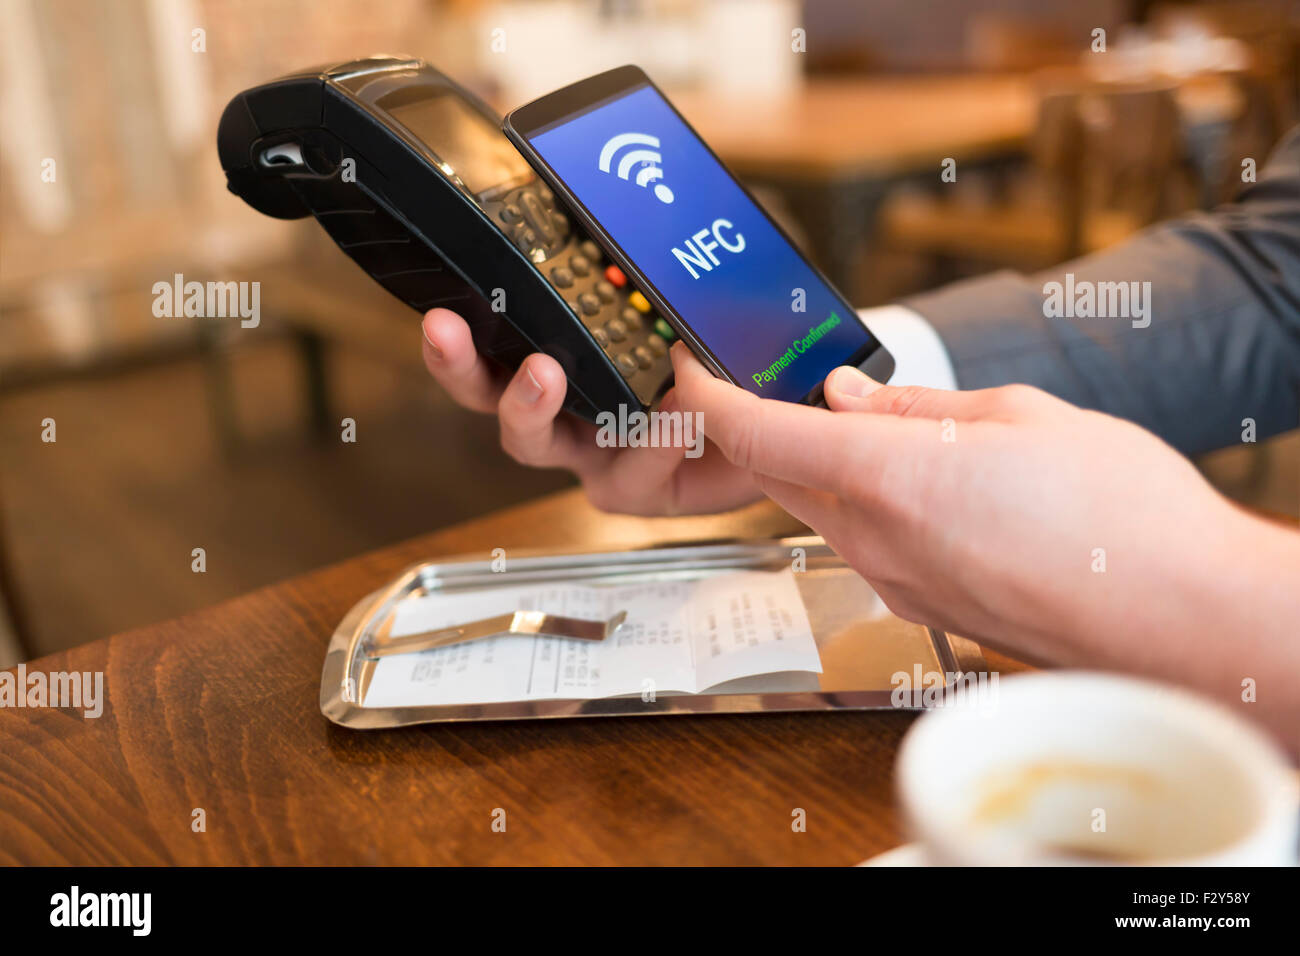 Man paying with NFC technology on mobile phone, in restaurant, bar, cafe Stock Photo